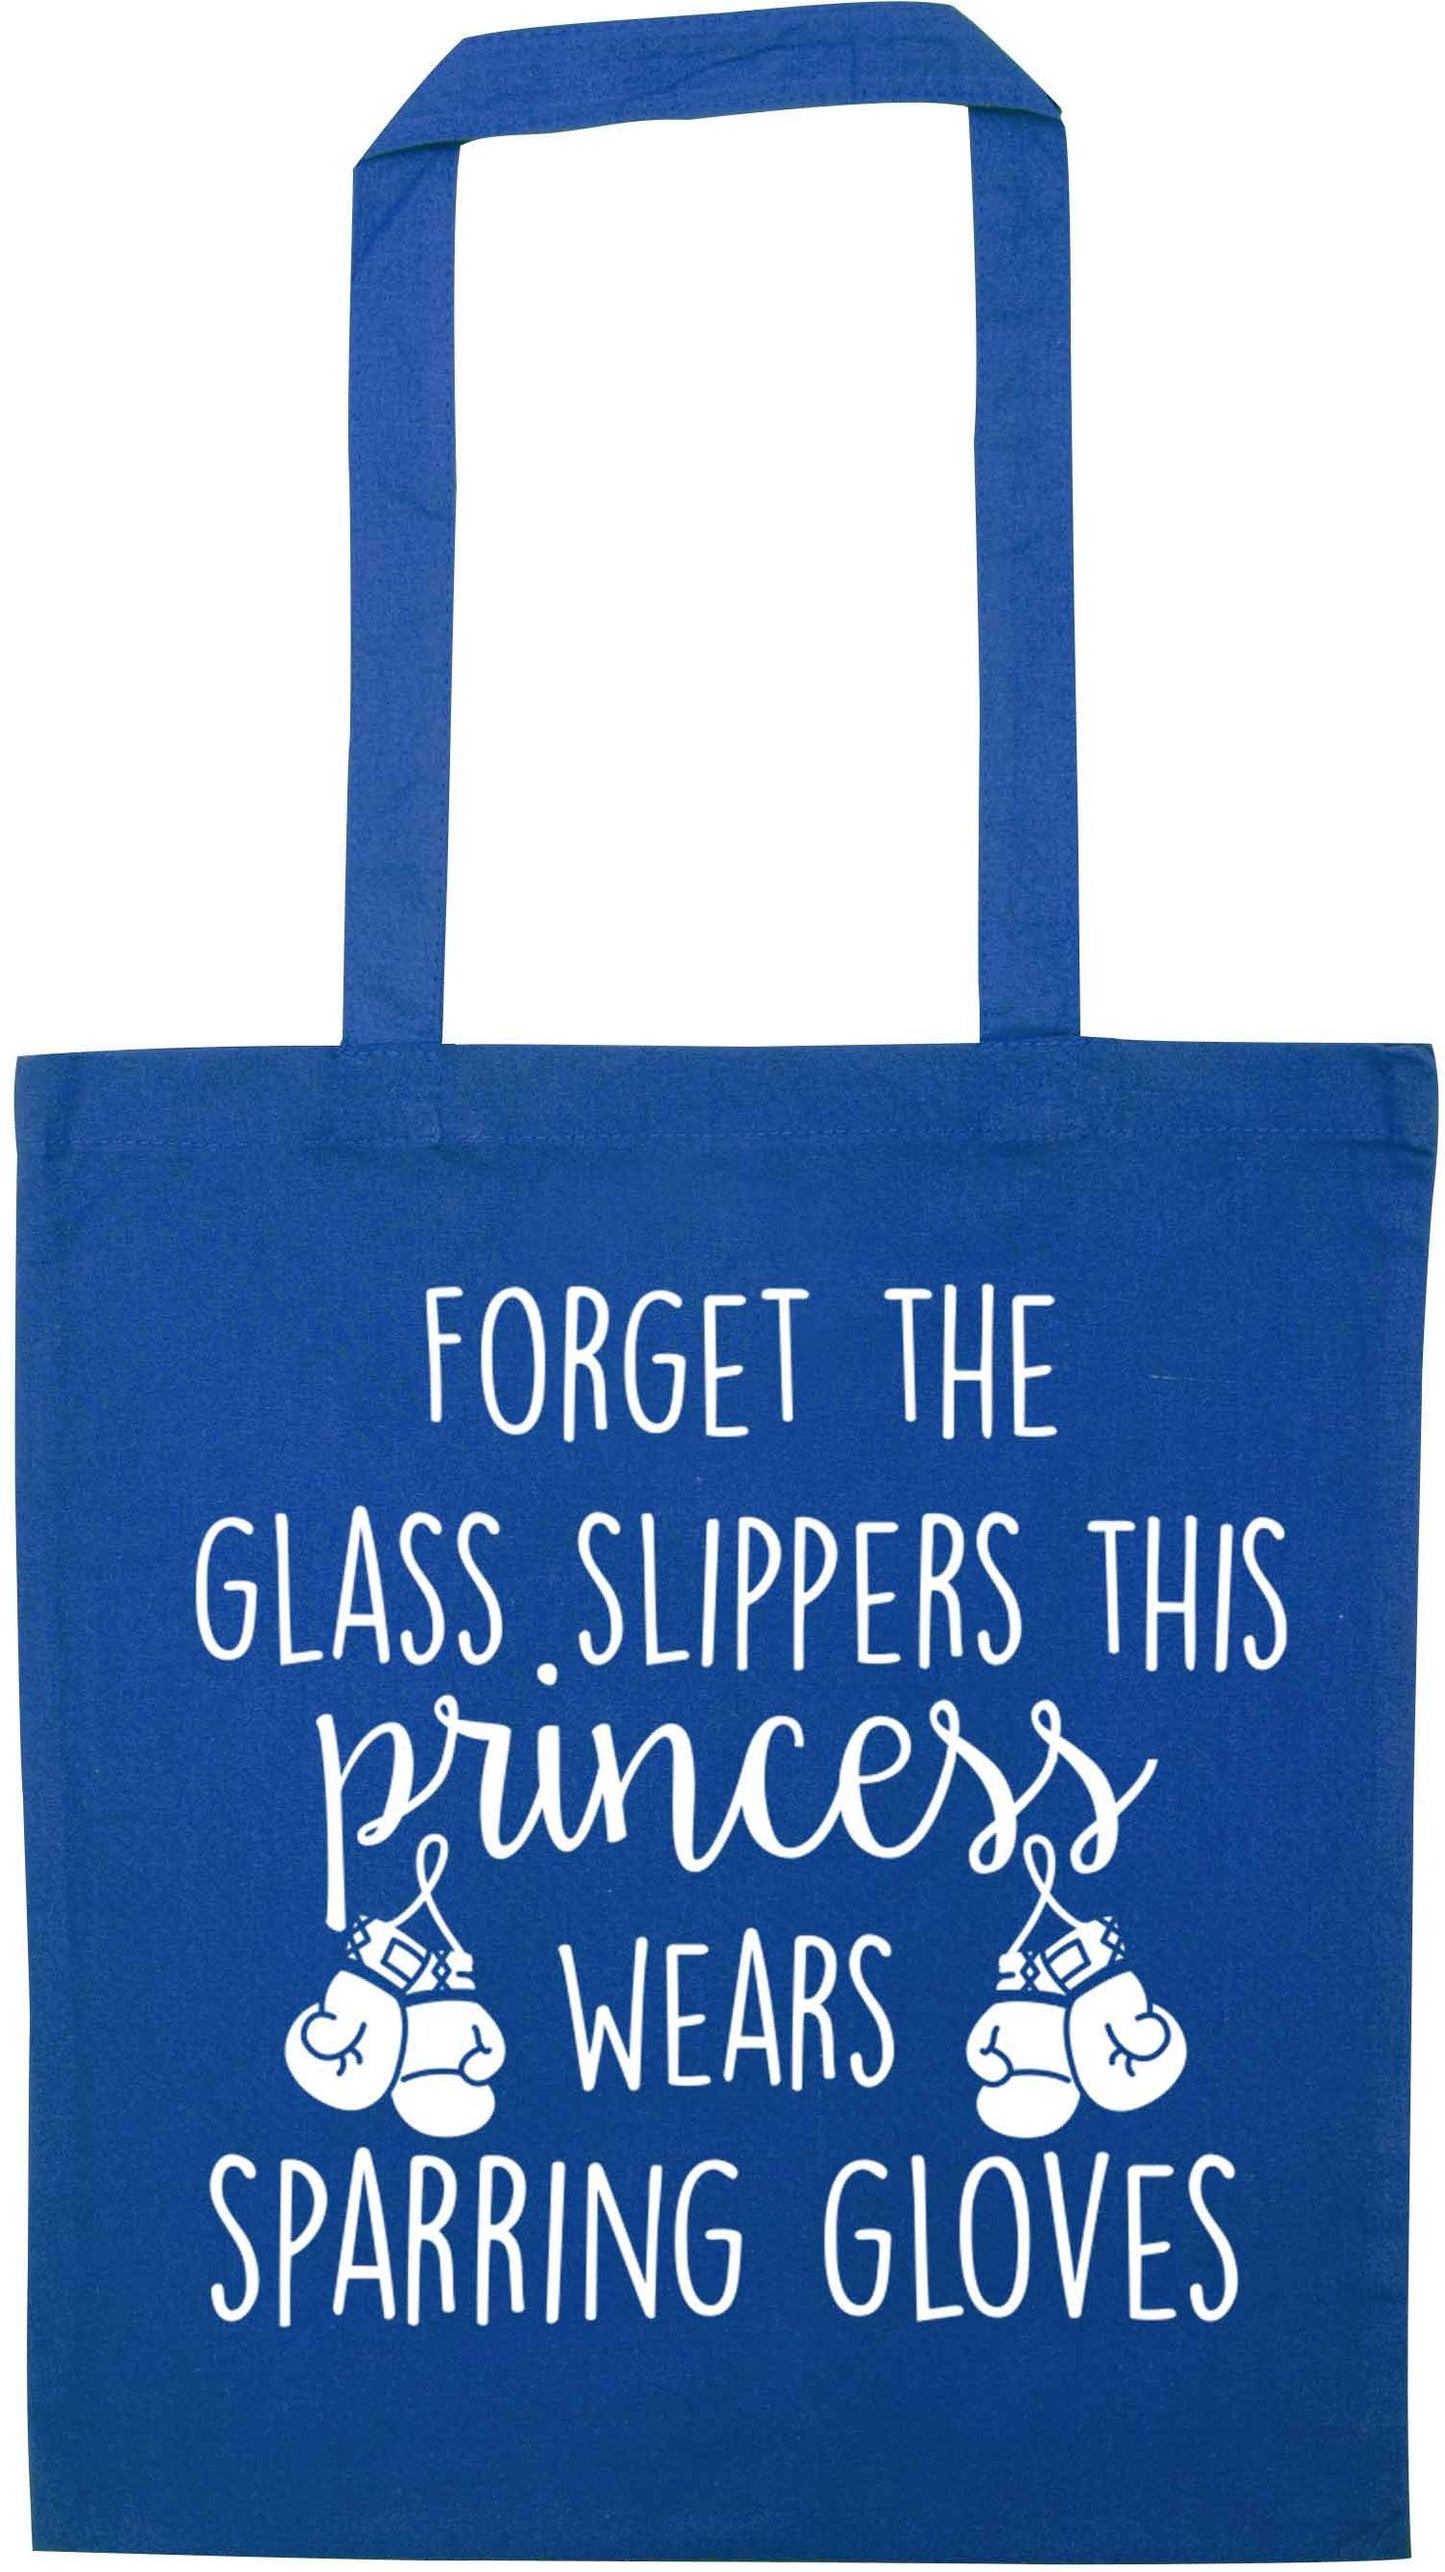 Forget the glass slippers this princess wears sparring gloves blue tote bag